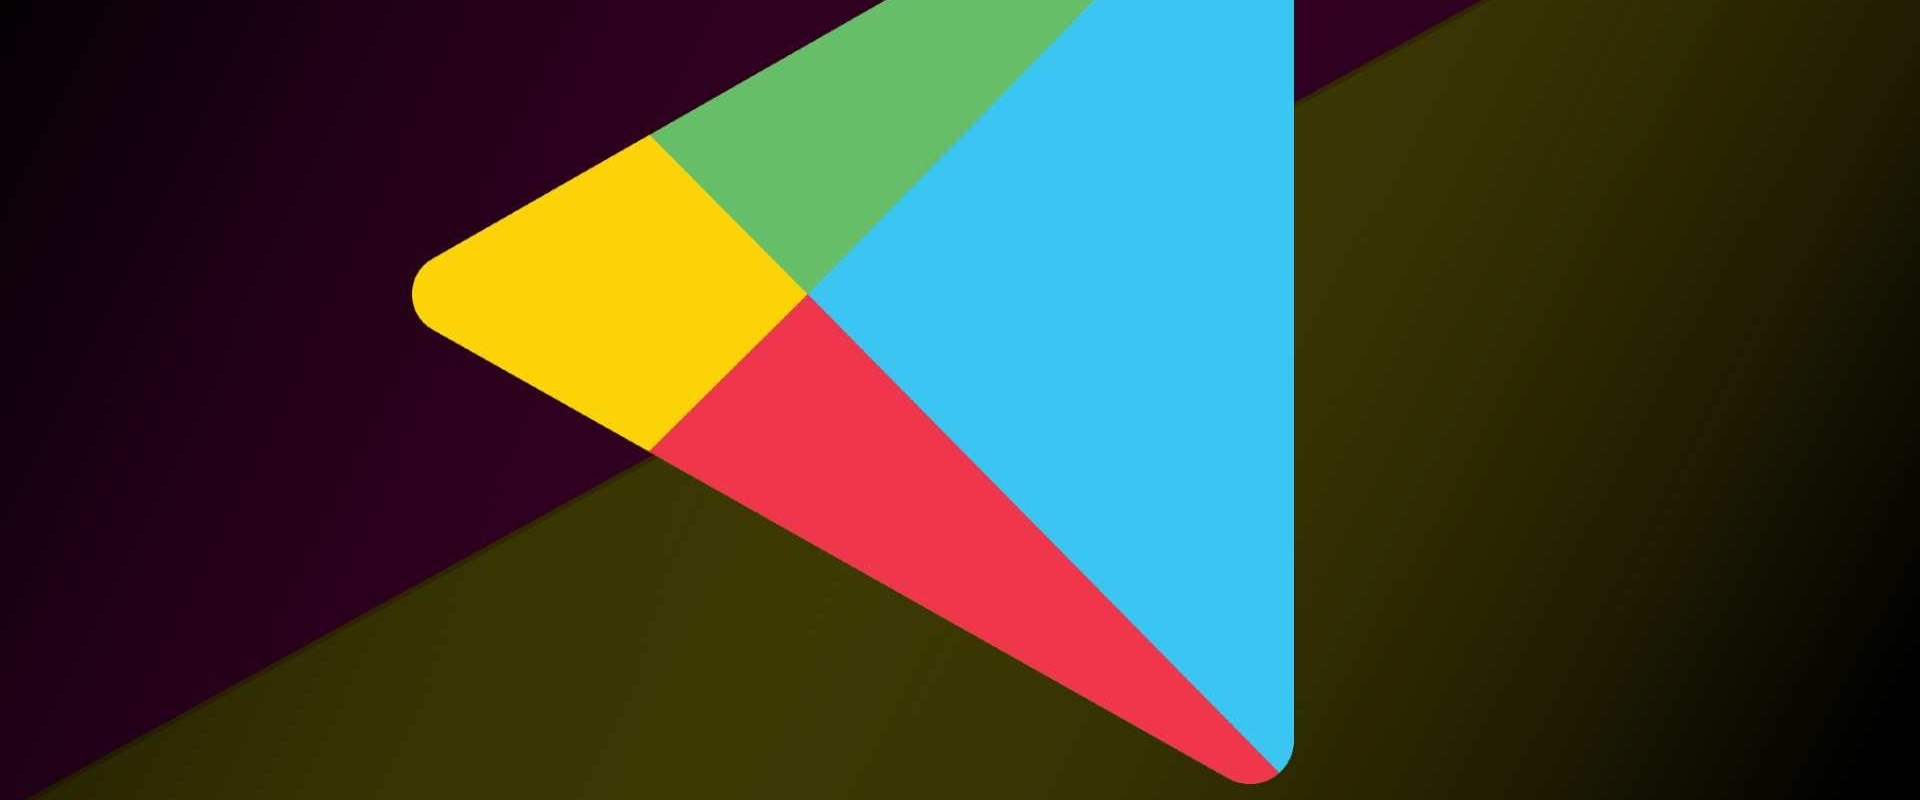 Subscribing to Updates on the Google Play Store